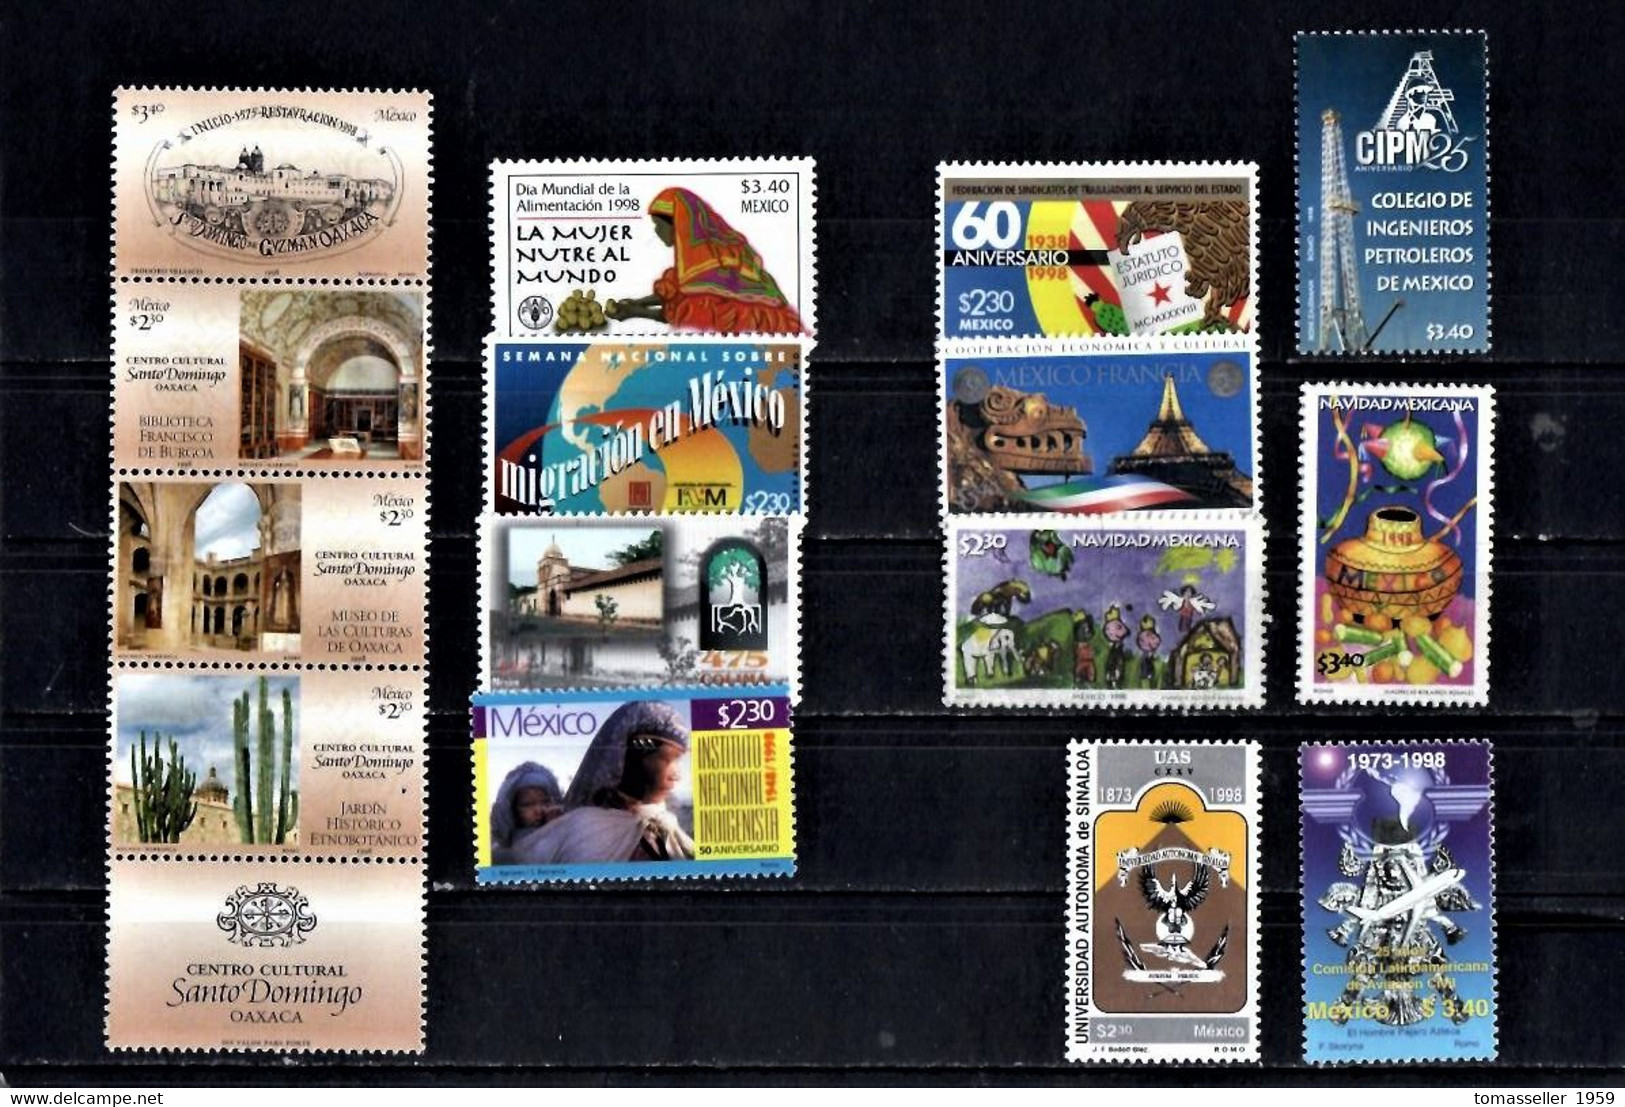 MEXICO-7 !!! Year (1993-1999) sets. MNH.Almost 280 issues